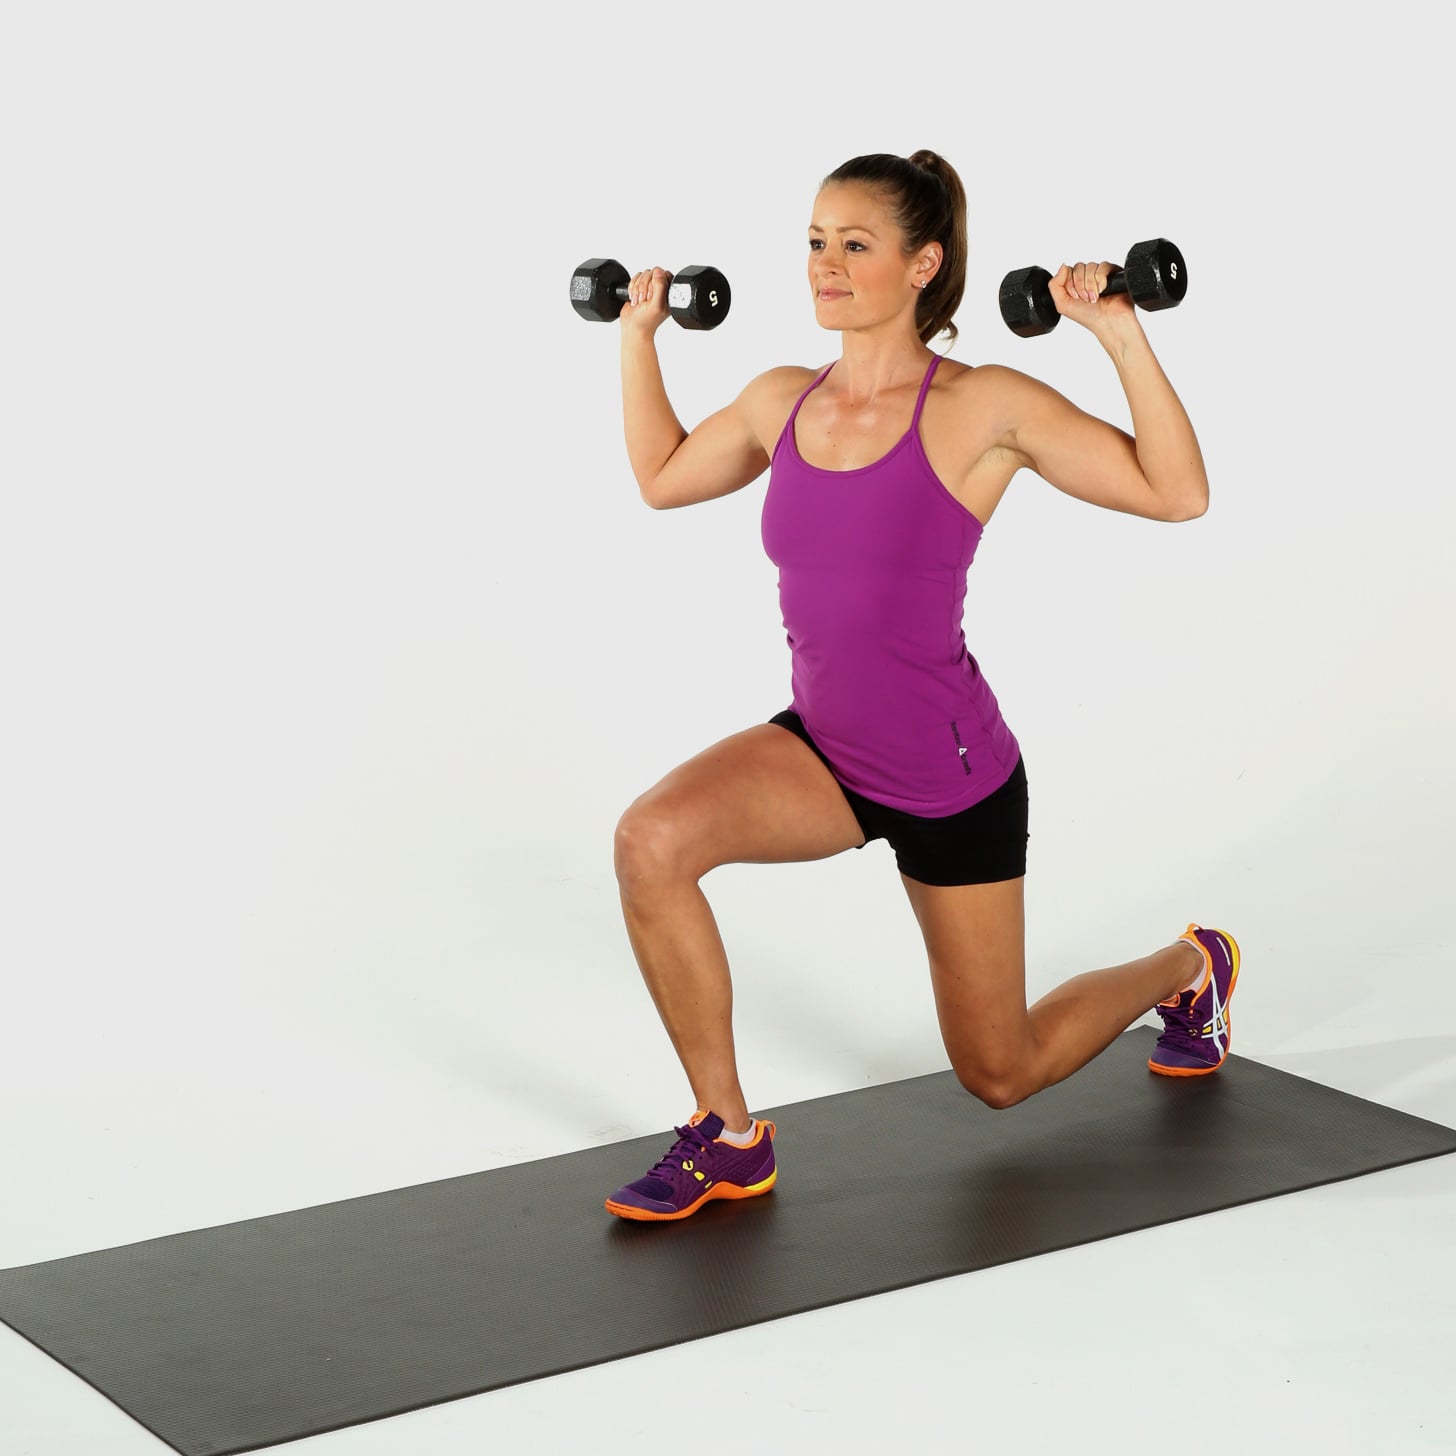 20-Minute Upper Body Workout with Dumbbells for Women Over 40 